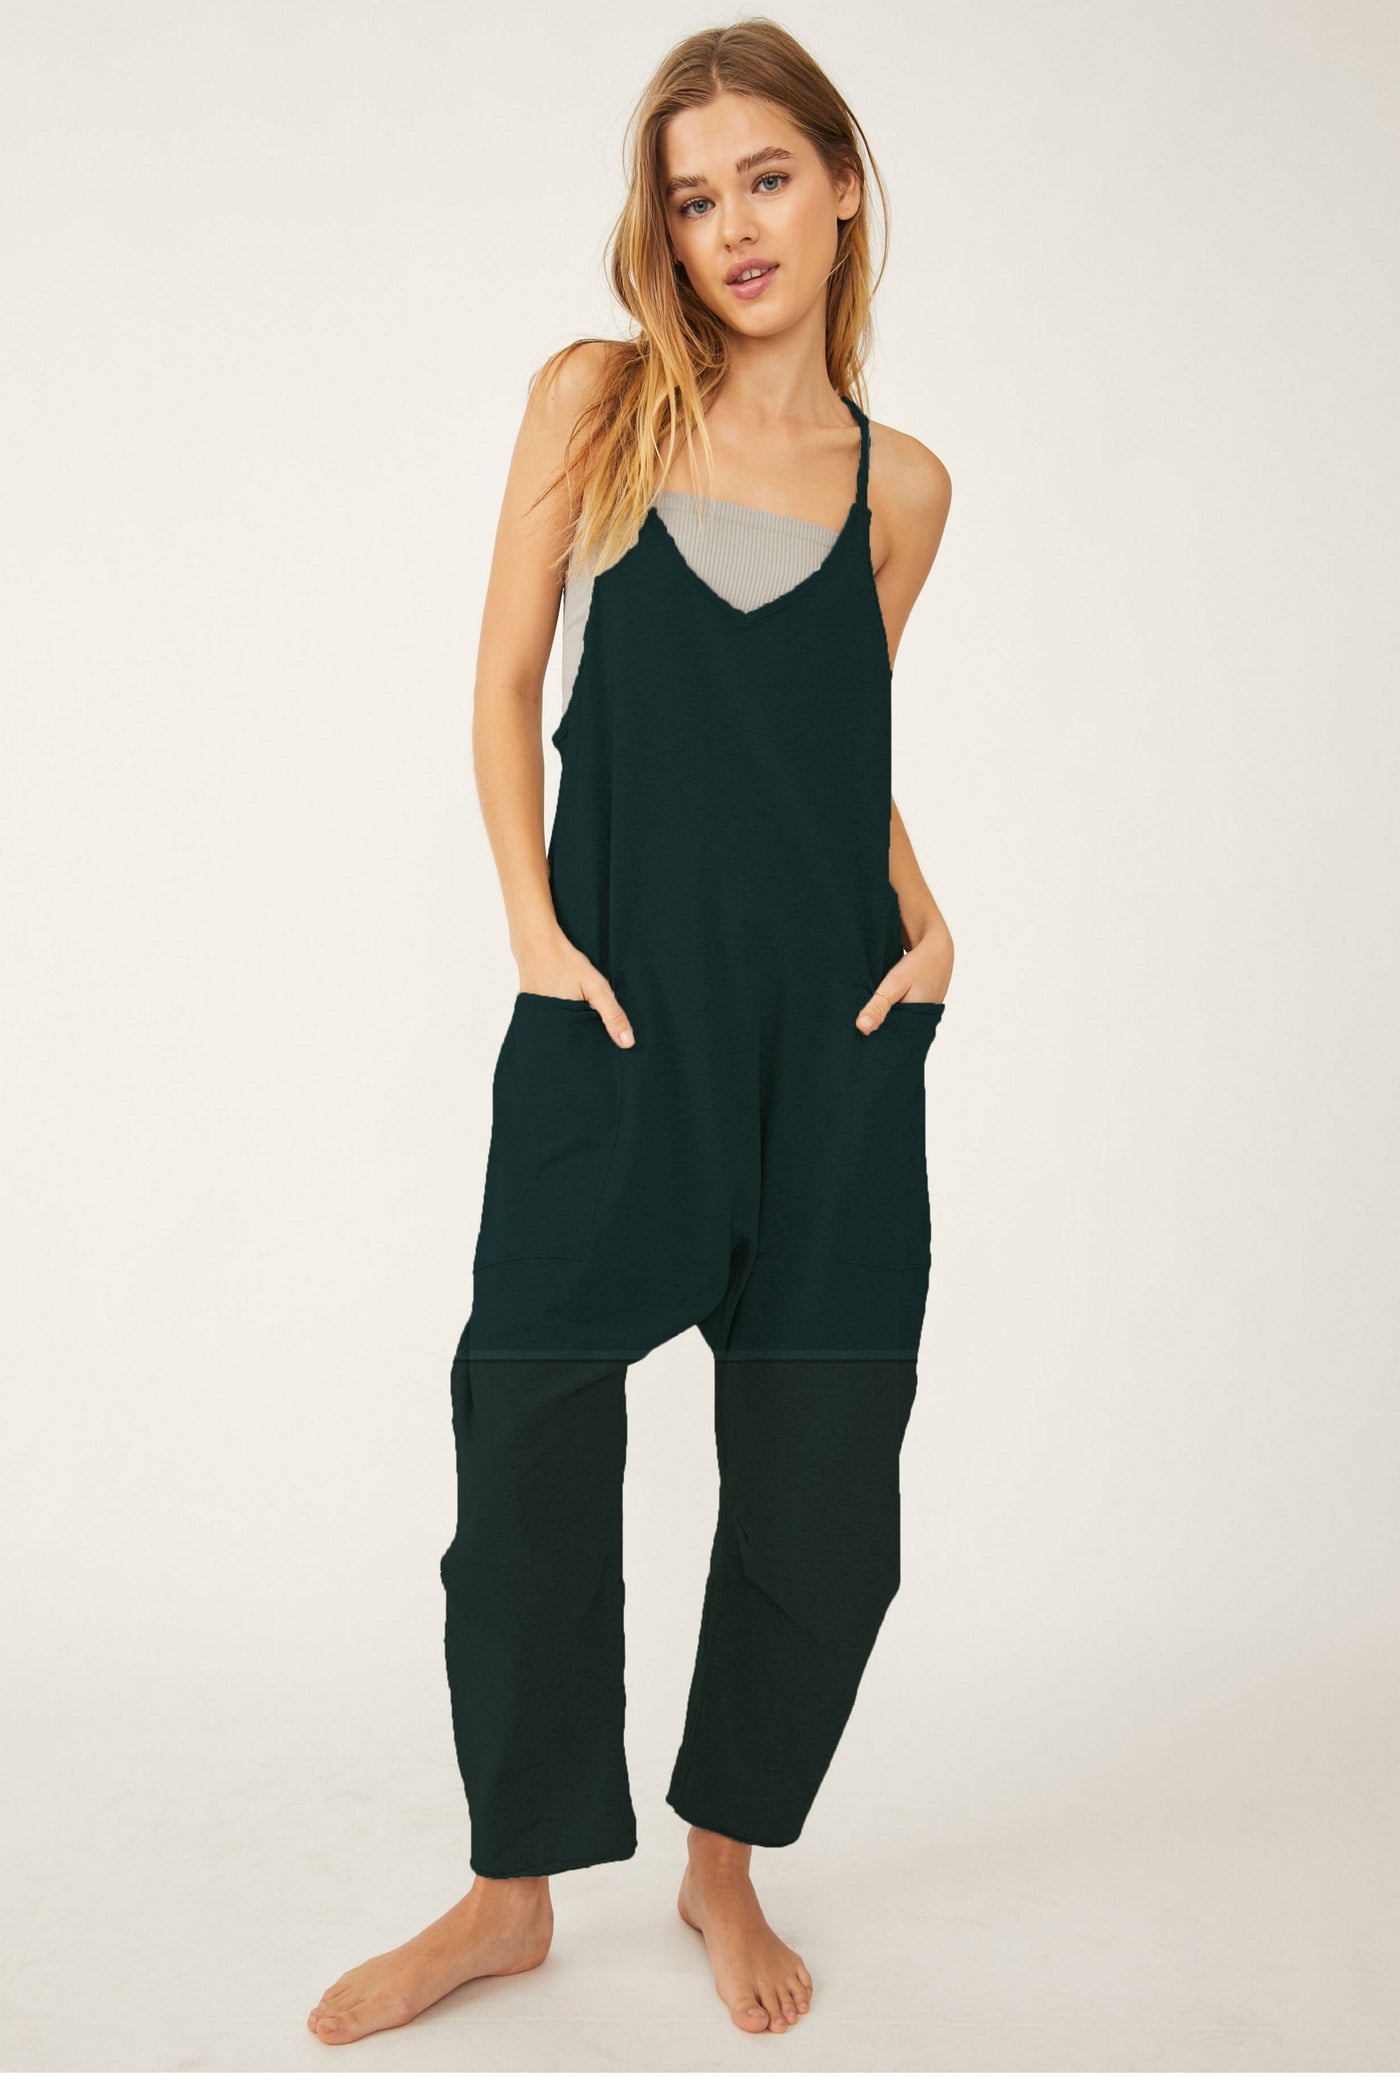 Free People Happiness Runs Henley Onesie - Washed Black